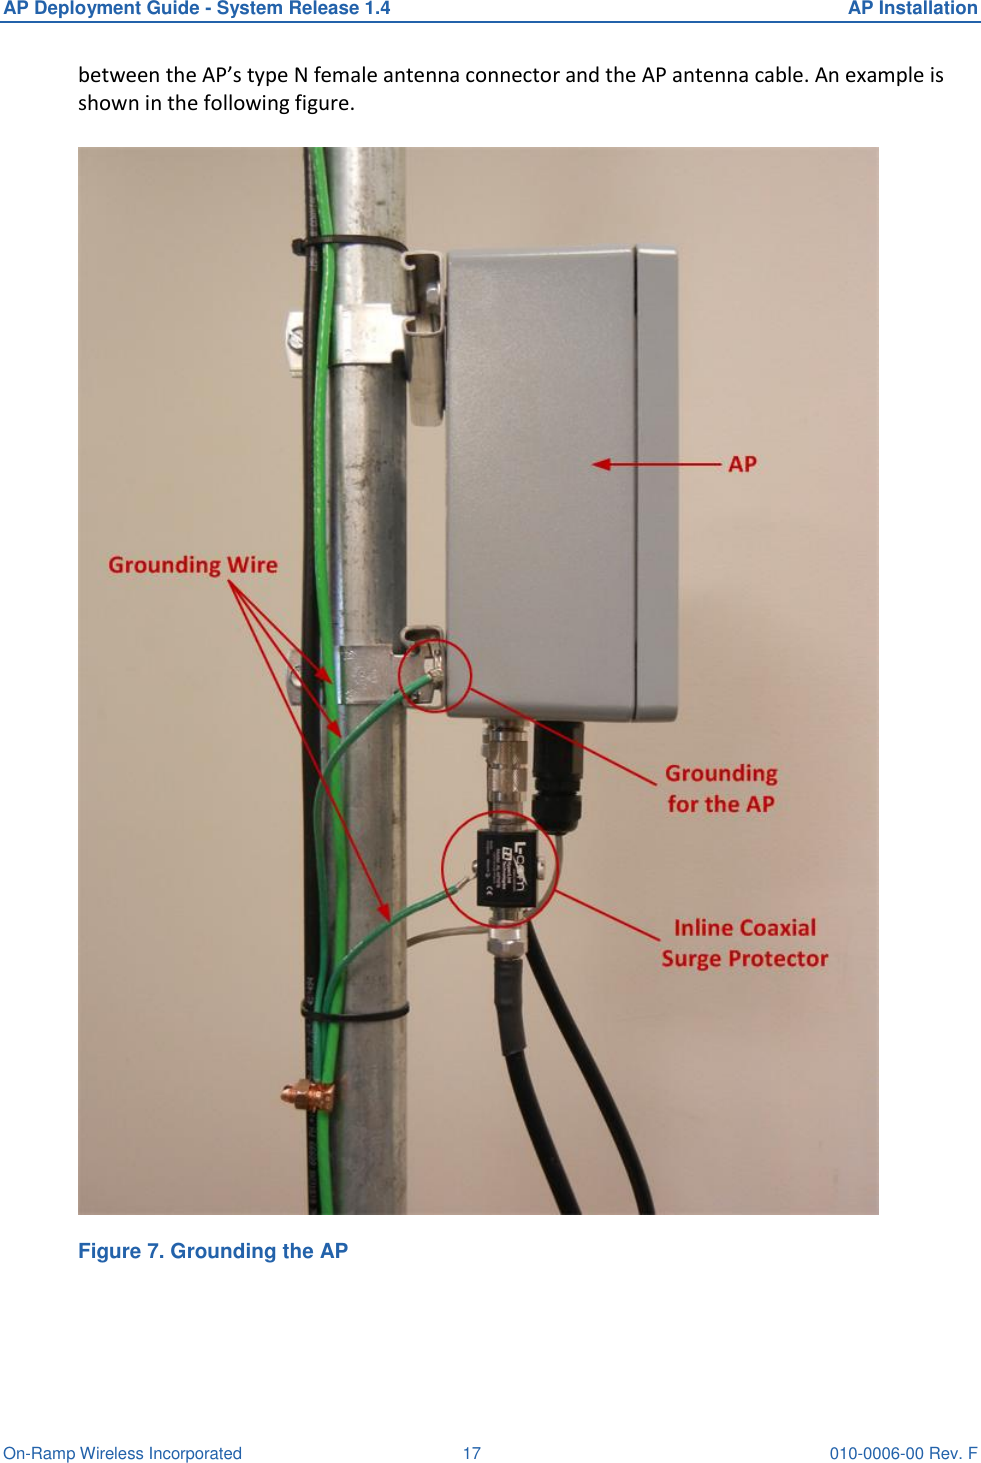 AP Deployment Guide - System Release 1.4  AP Installation On-Ramp Wireless Incorporated  17 010-0006-00 Rev. F between the AP’s type N female antenna connector and the AP antenna cable. An example is shown in the following figure.   Figure 7. Grounding the AP 